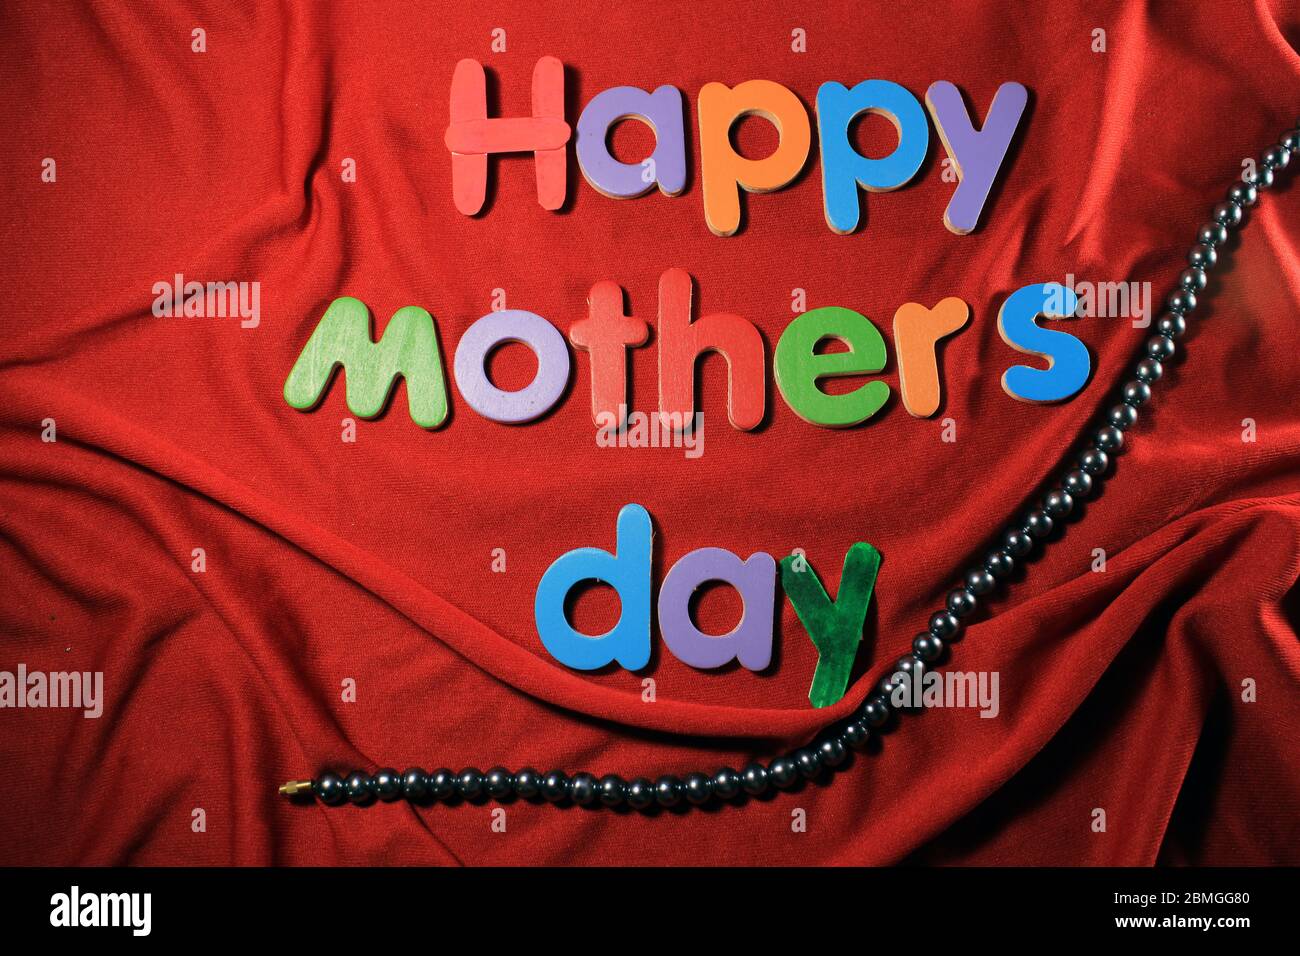 Happy Mother's Day written on red cloth texture background. Happy Mother's day written by colorful alphabet blocks. Stock Photo